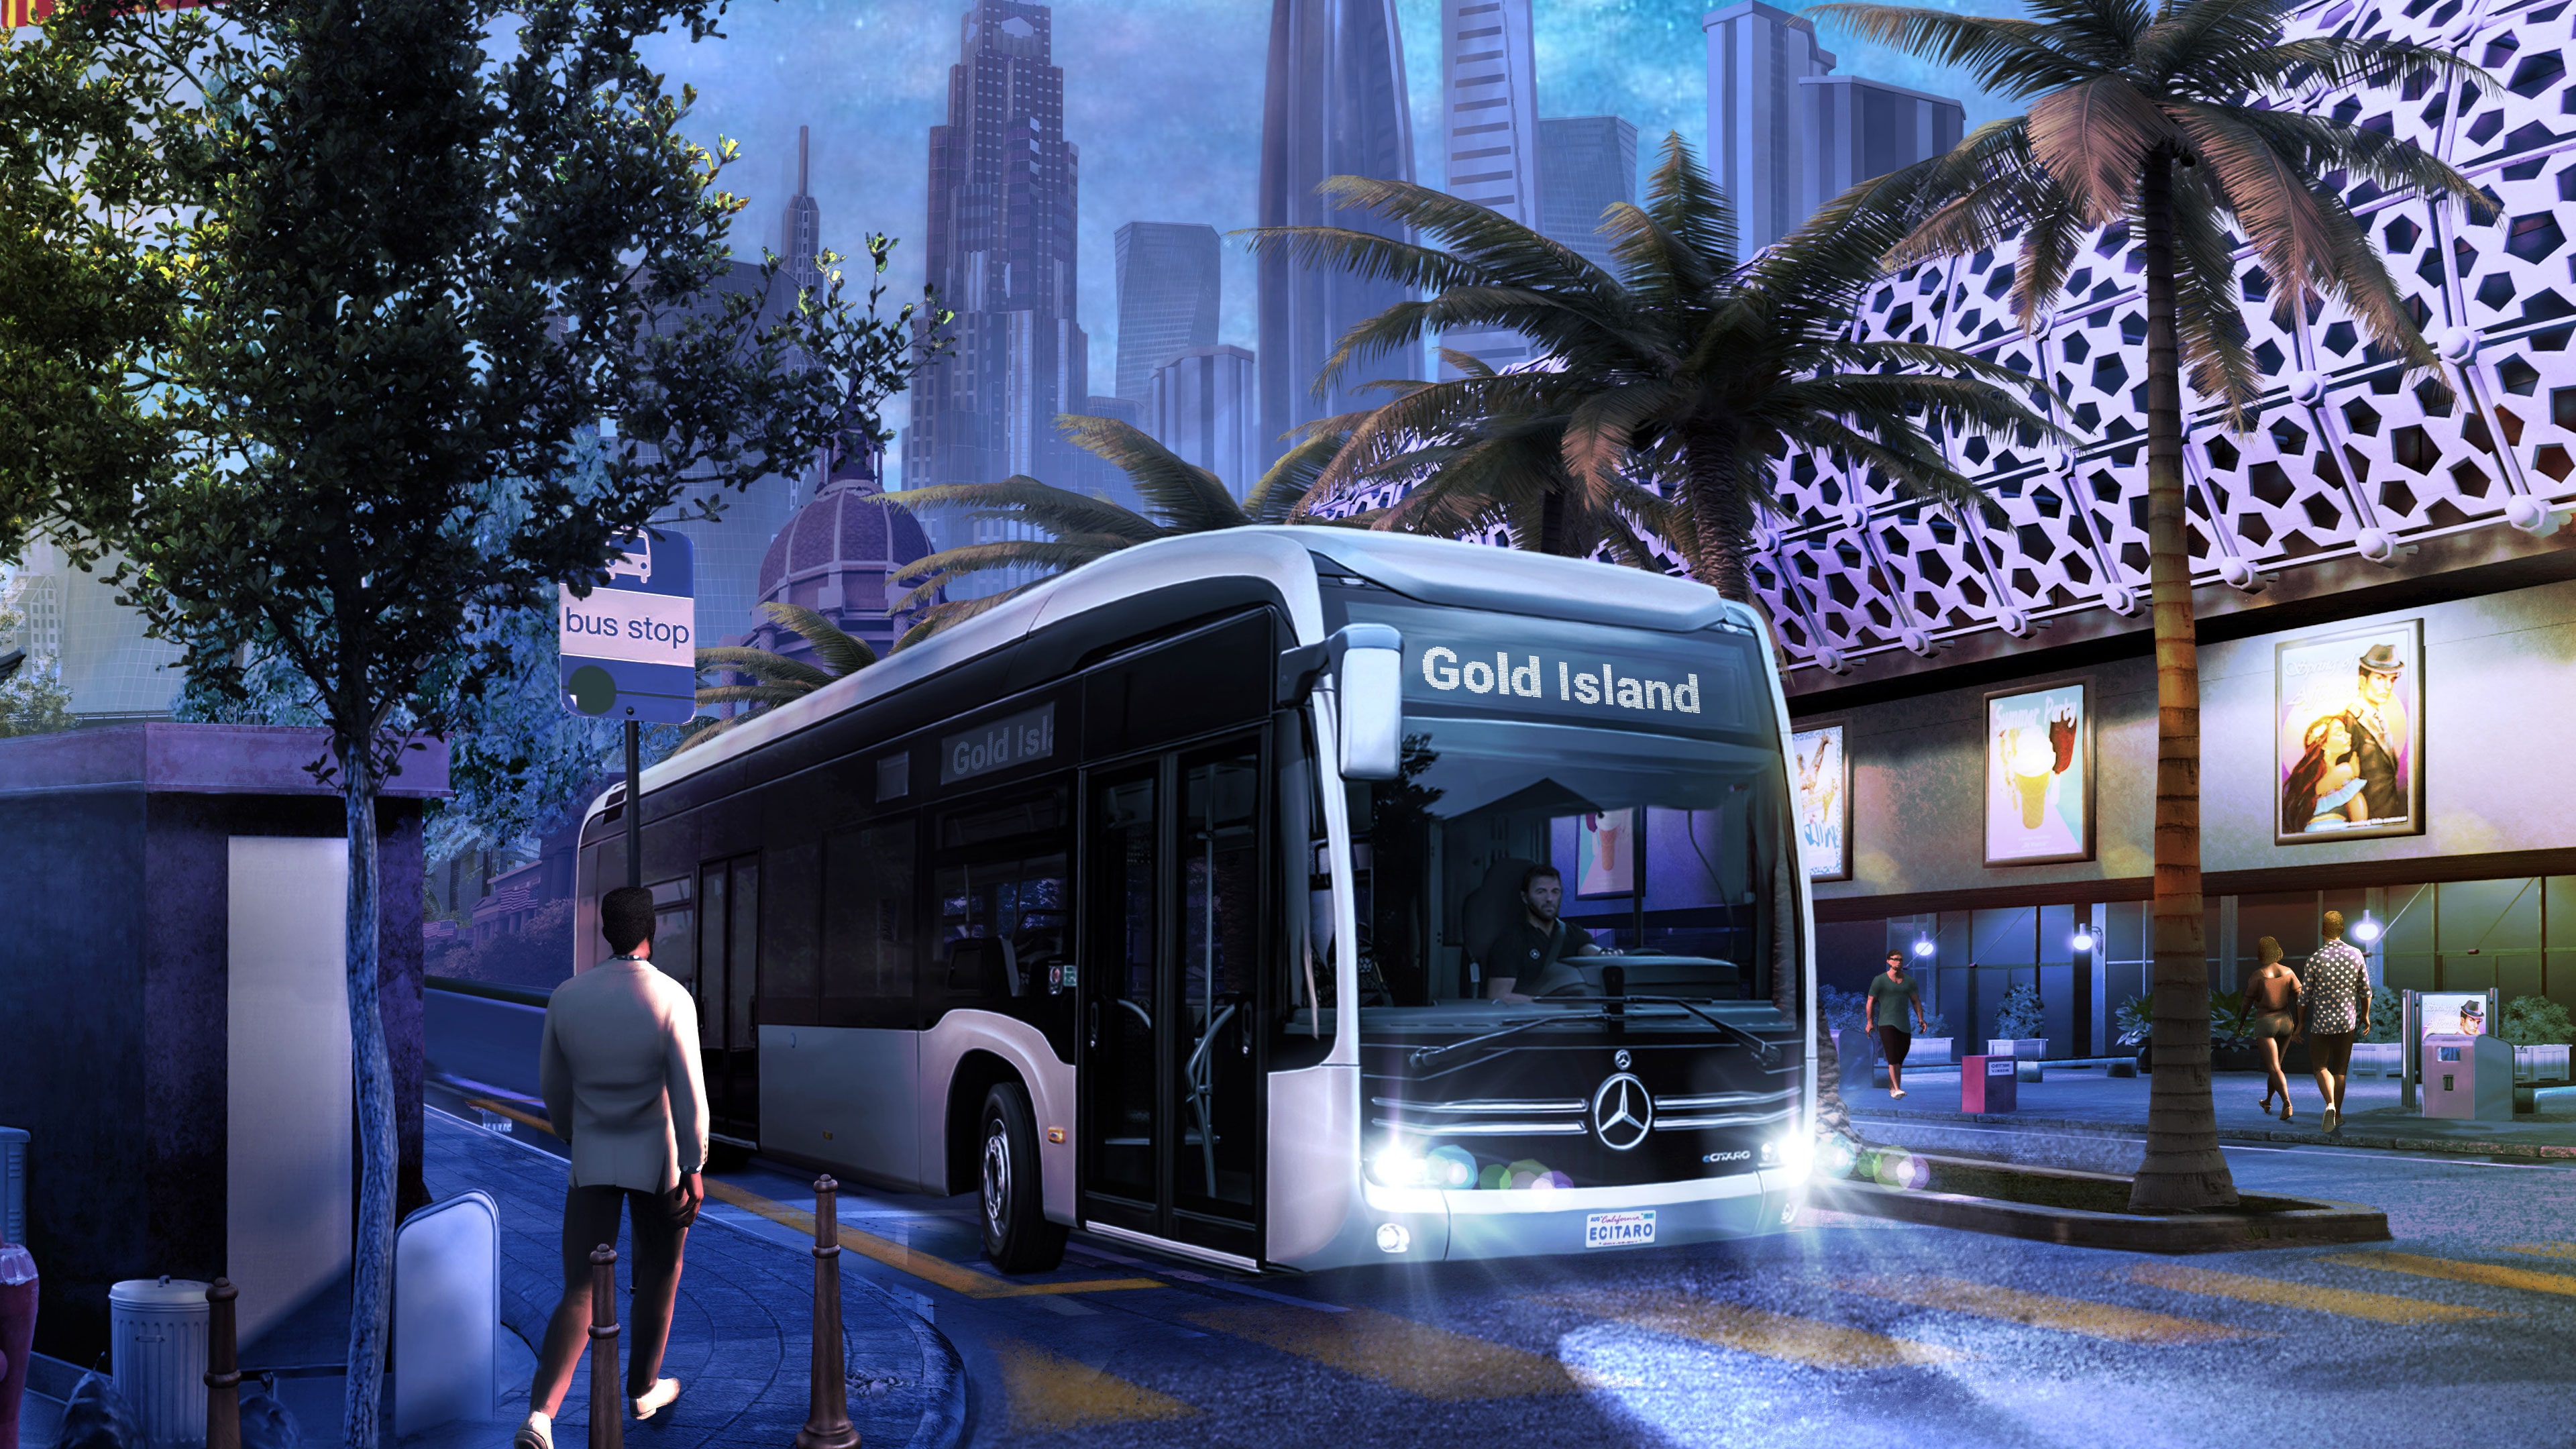 Bus Simulator 21 Next Stop - Official Map Extension